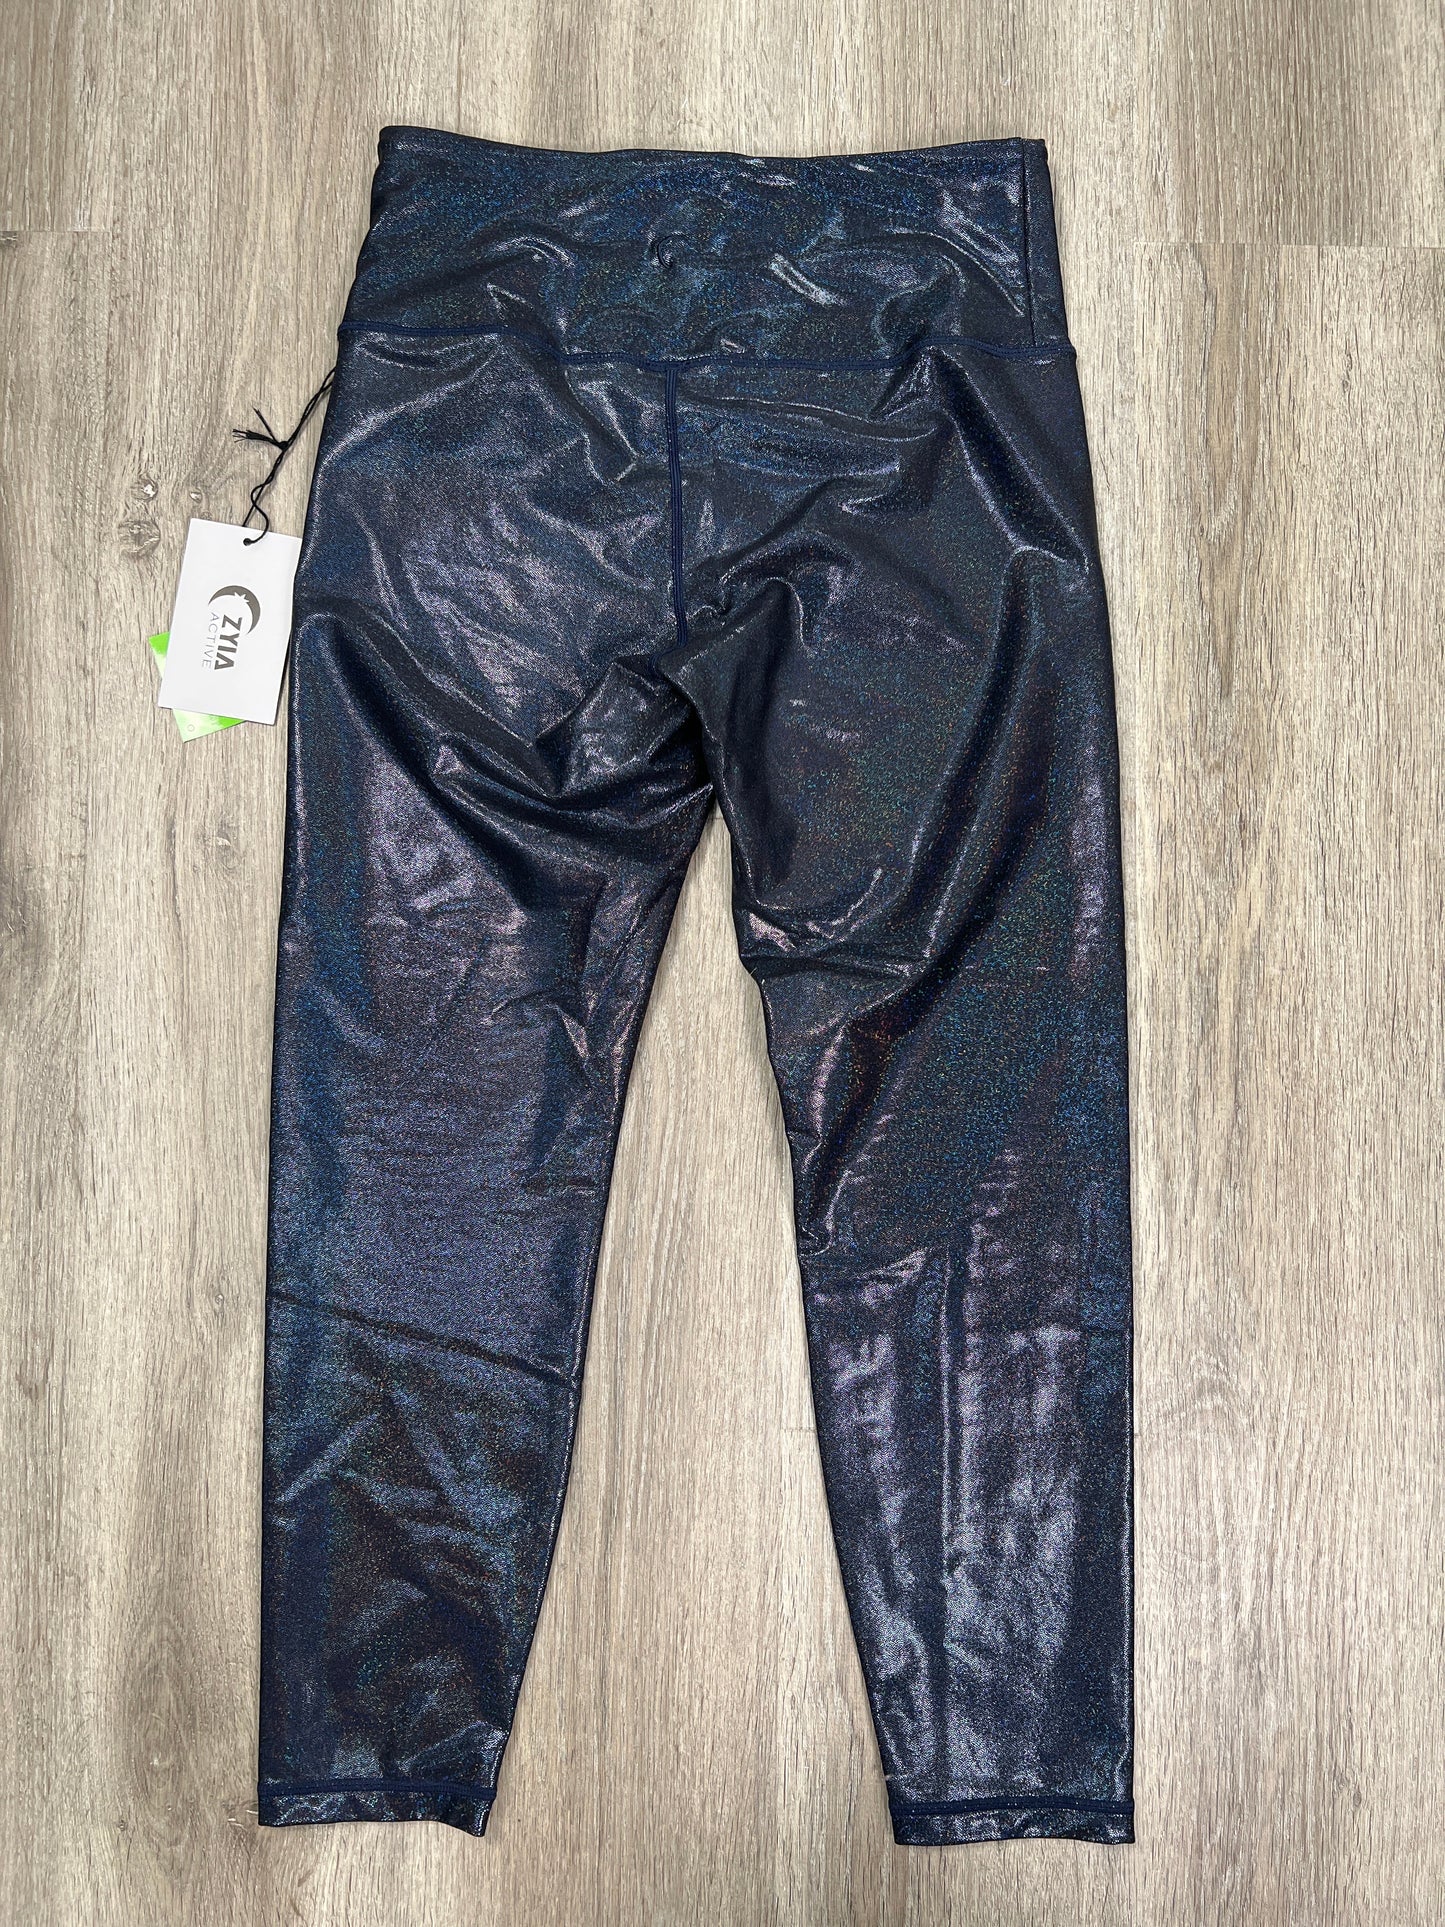 Athletic Leggings By Zyia  Size: L